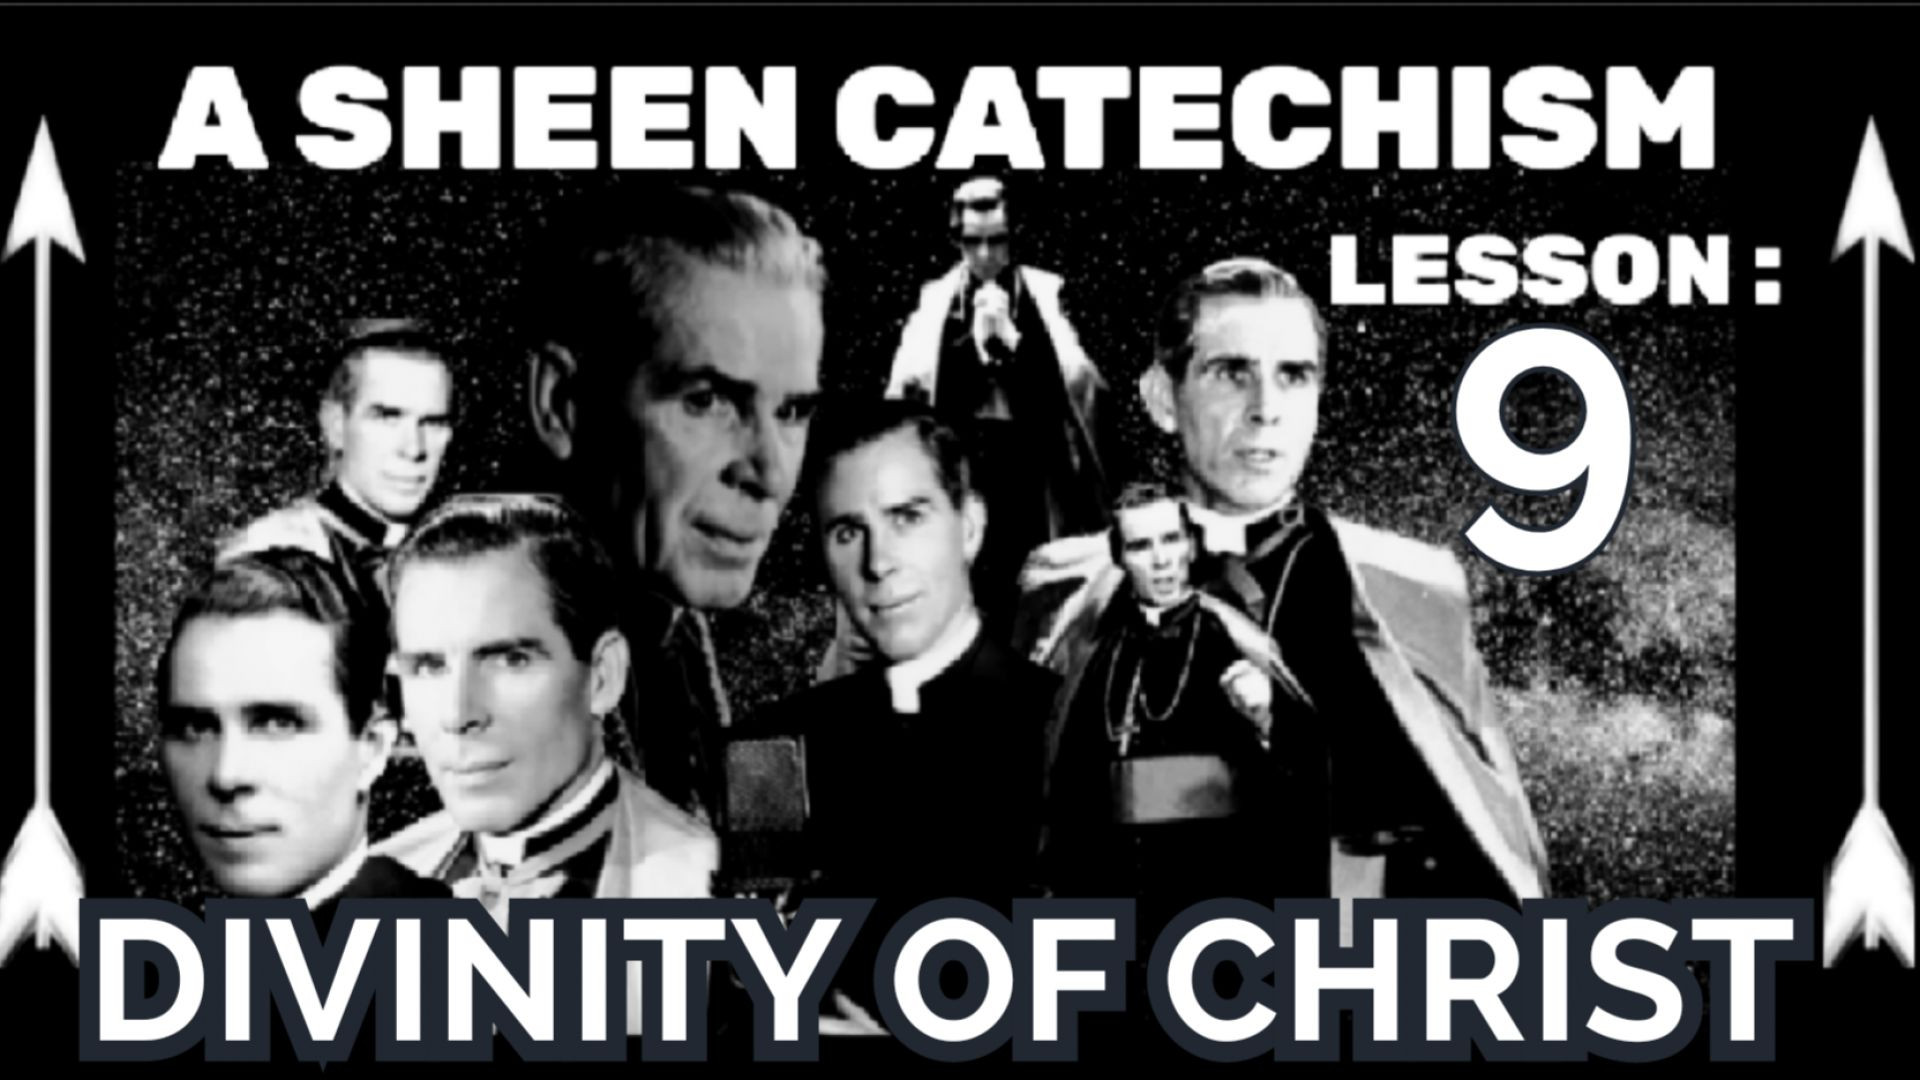 A SHEEN CATECHISM LESSON 9: DIVINITY OF CHRIST